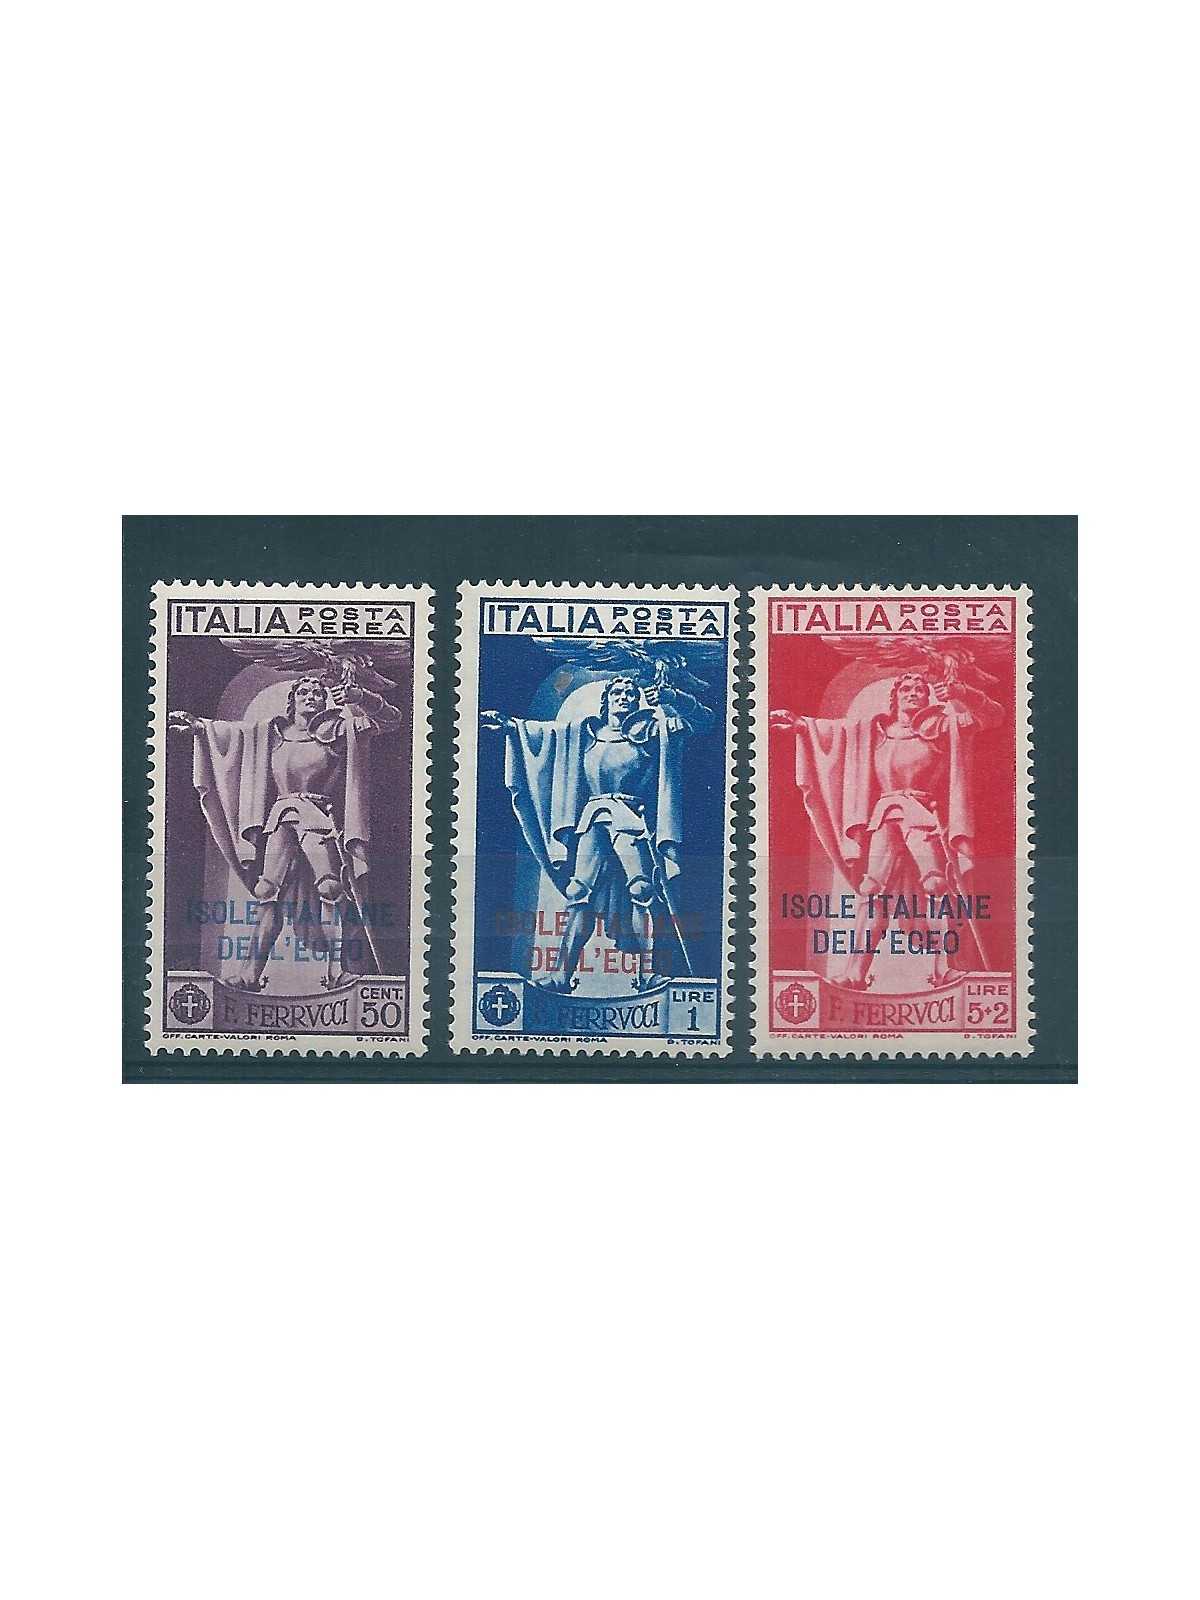 1930 ISOLE EGEO SERIE FERRUCCI 3 VAL PA MLH MF17008